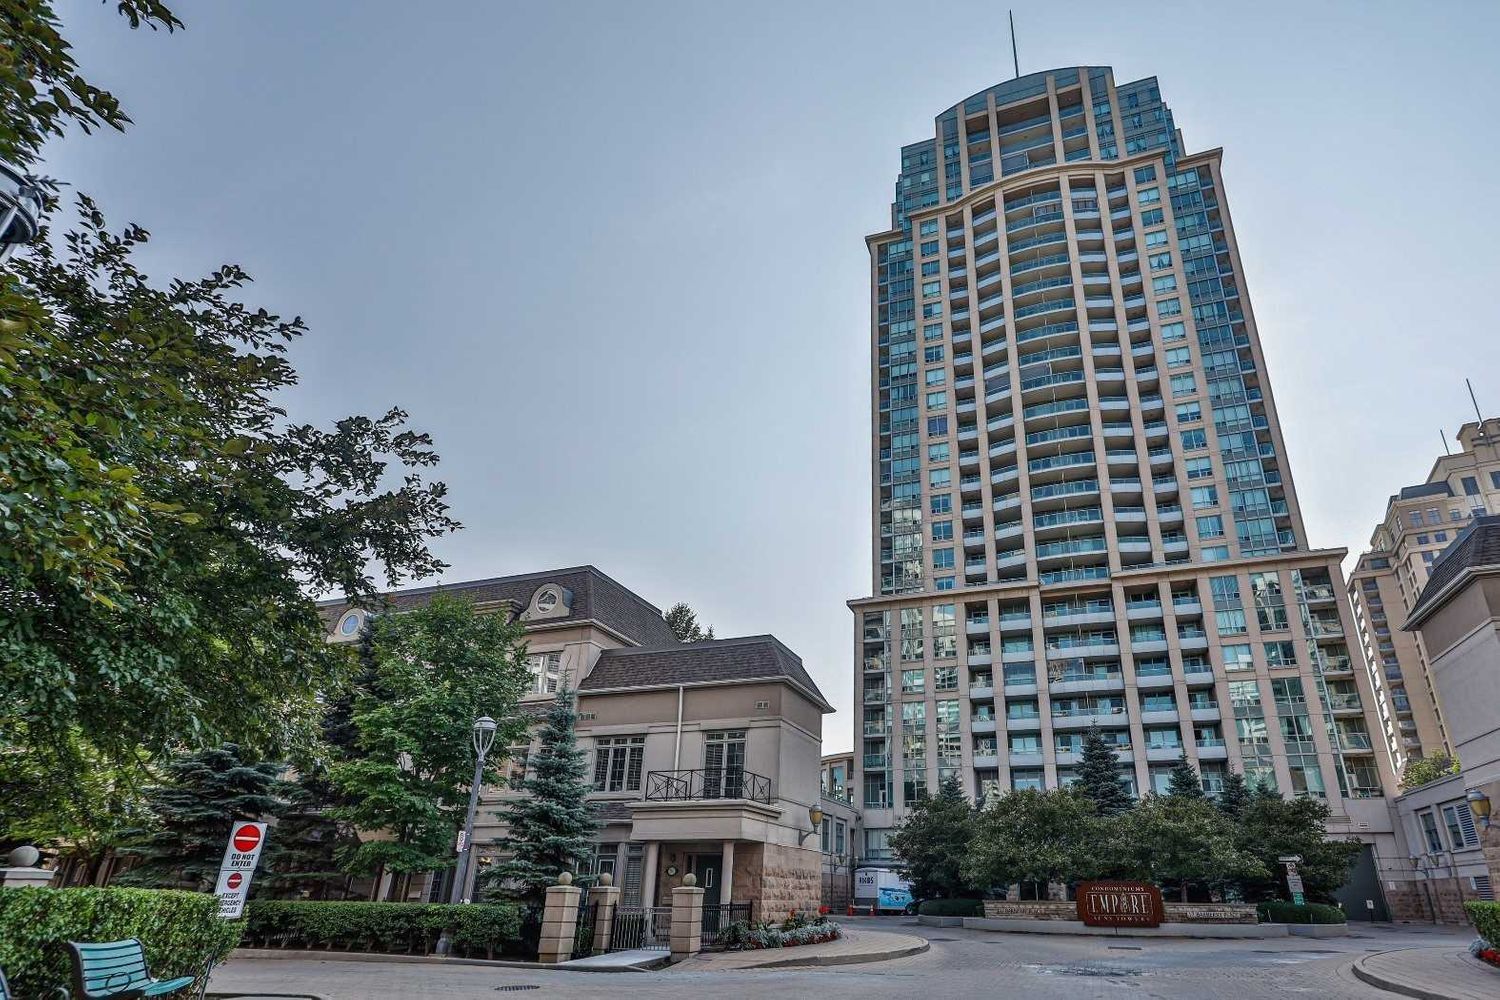 17 Barberry Place. Kenaston Gardens Condos is located in  North York, Toronto - image #4 of 4